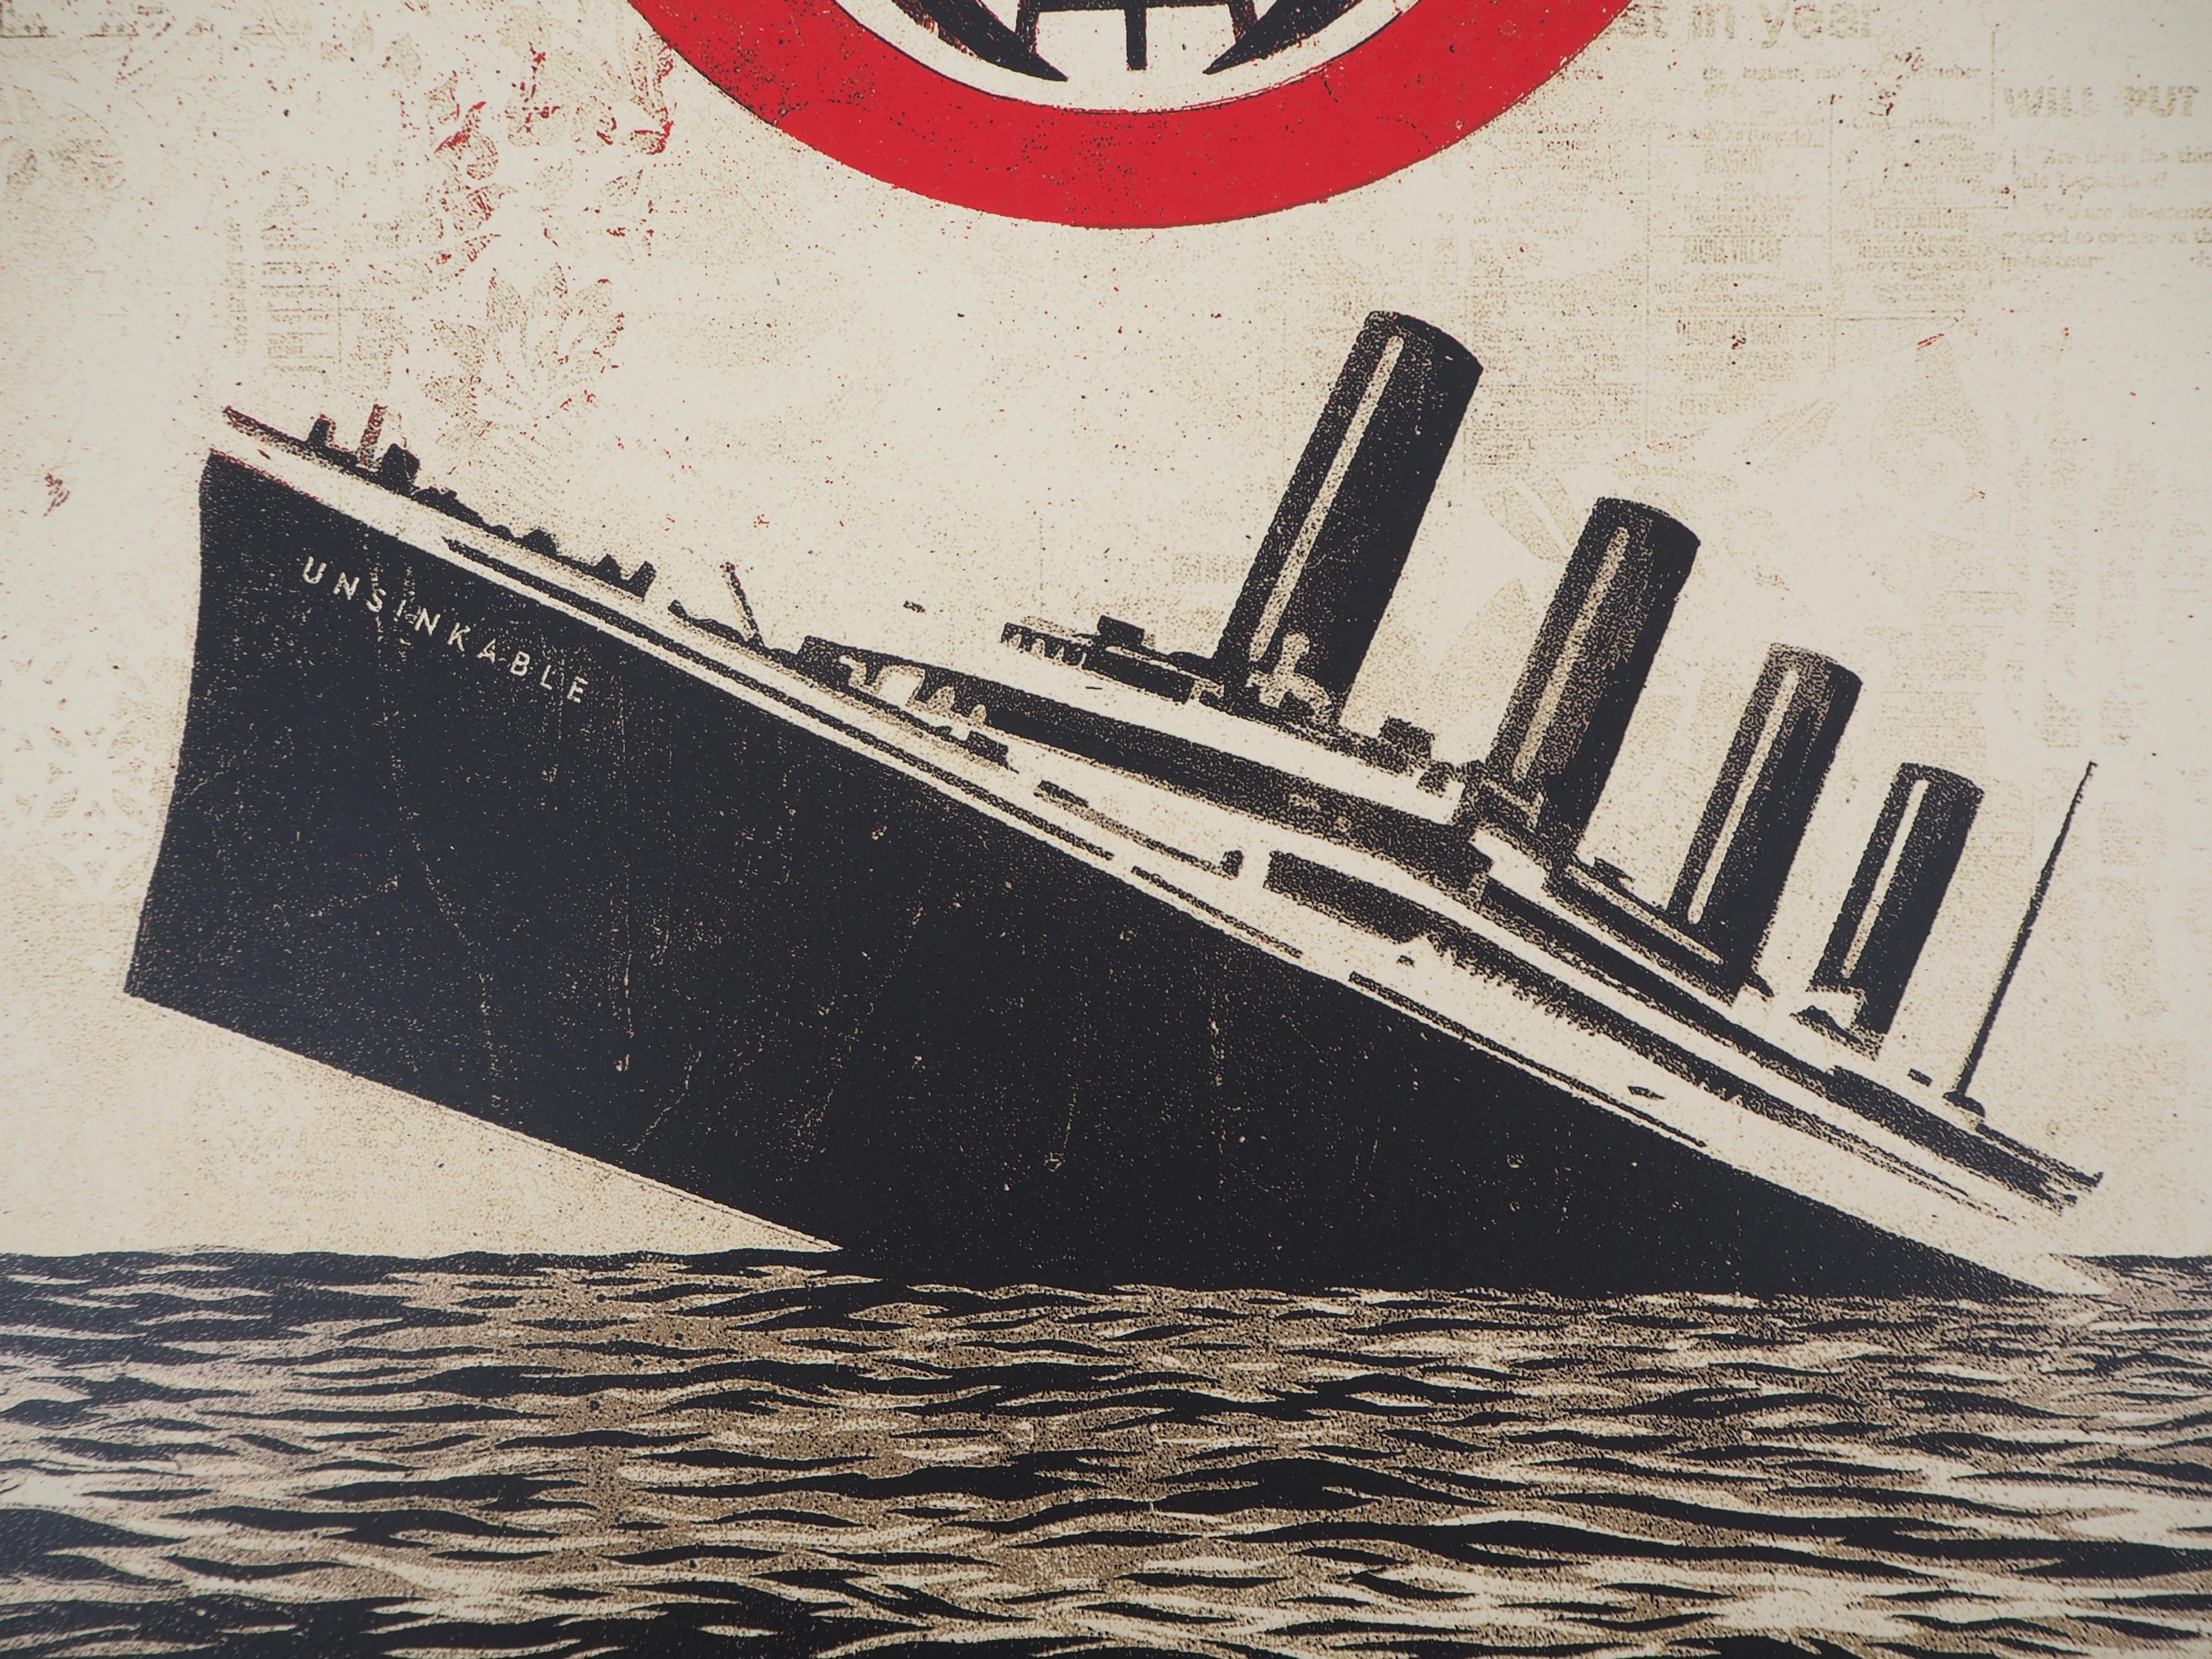 Titanic : Consume - Original Handsigned and Numbered Screen Print 1